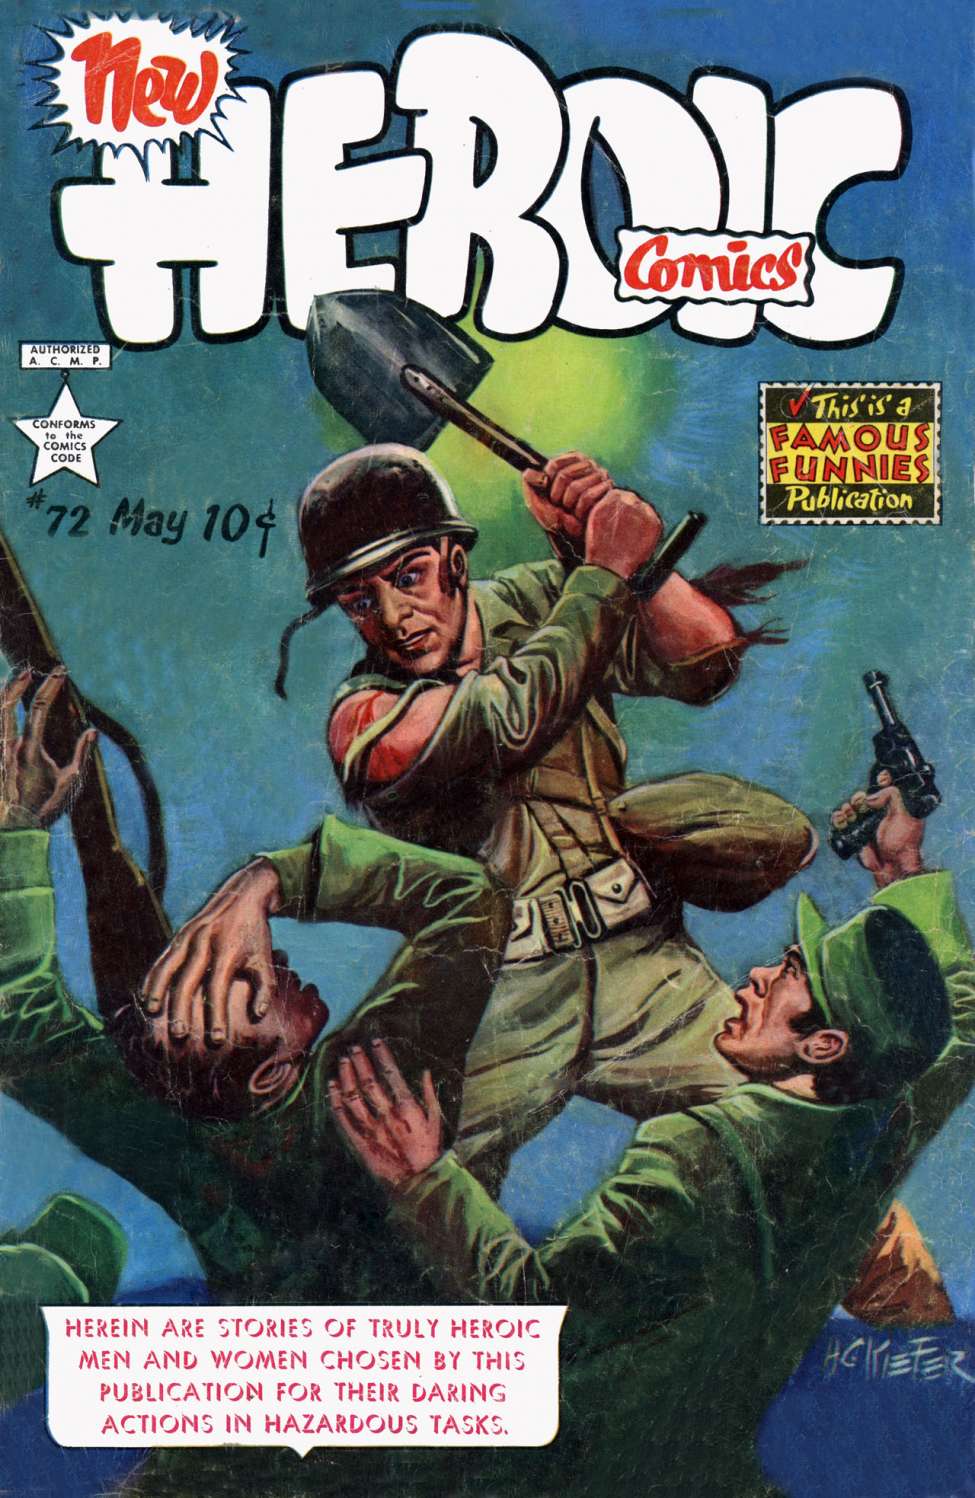 Comic Book Cover For New Heroic Comics 72 - Version 1